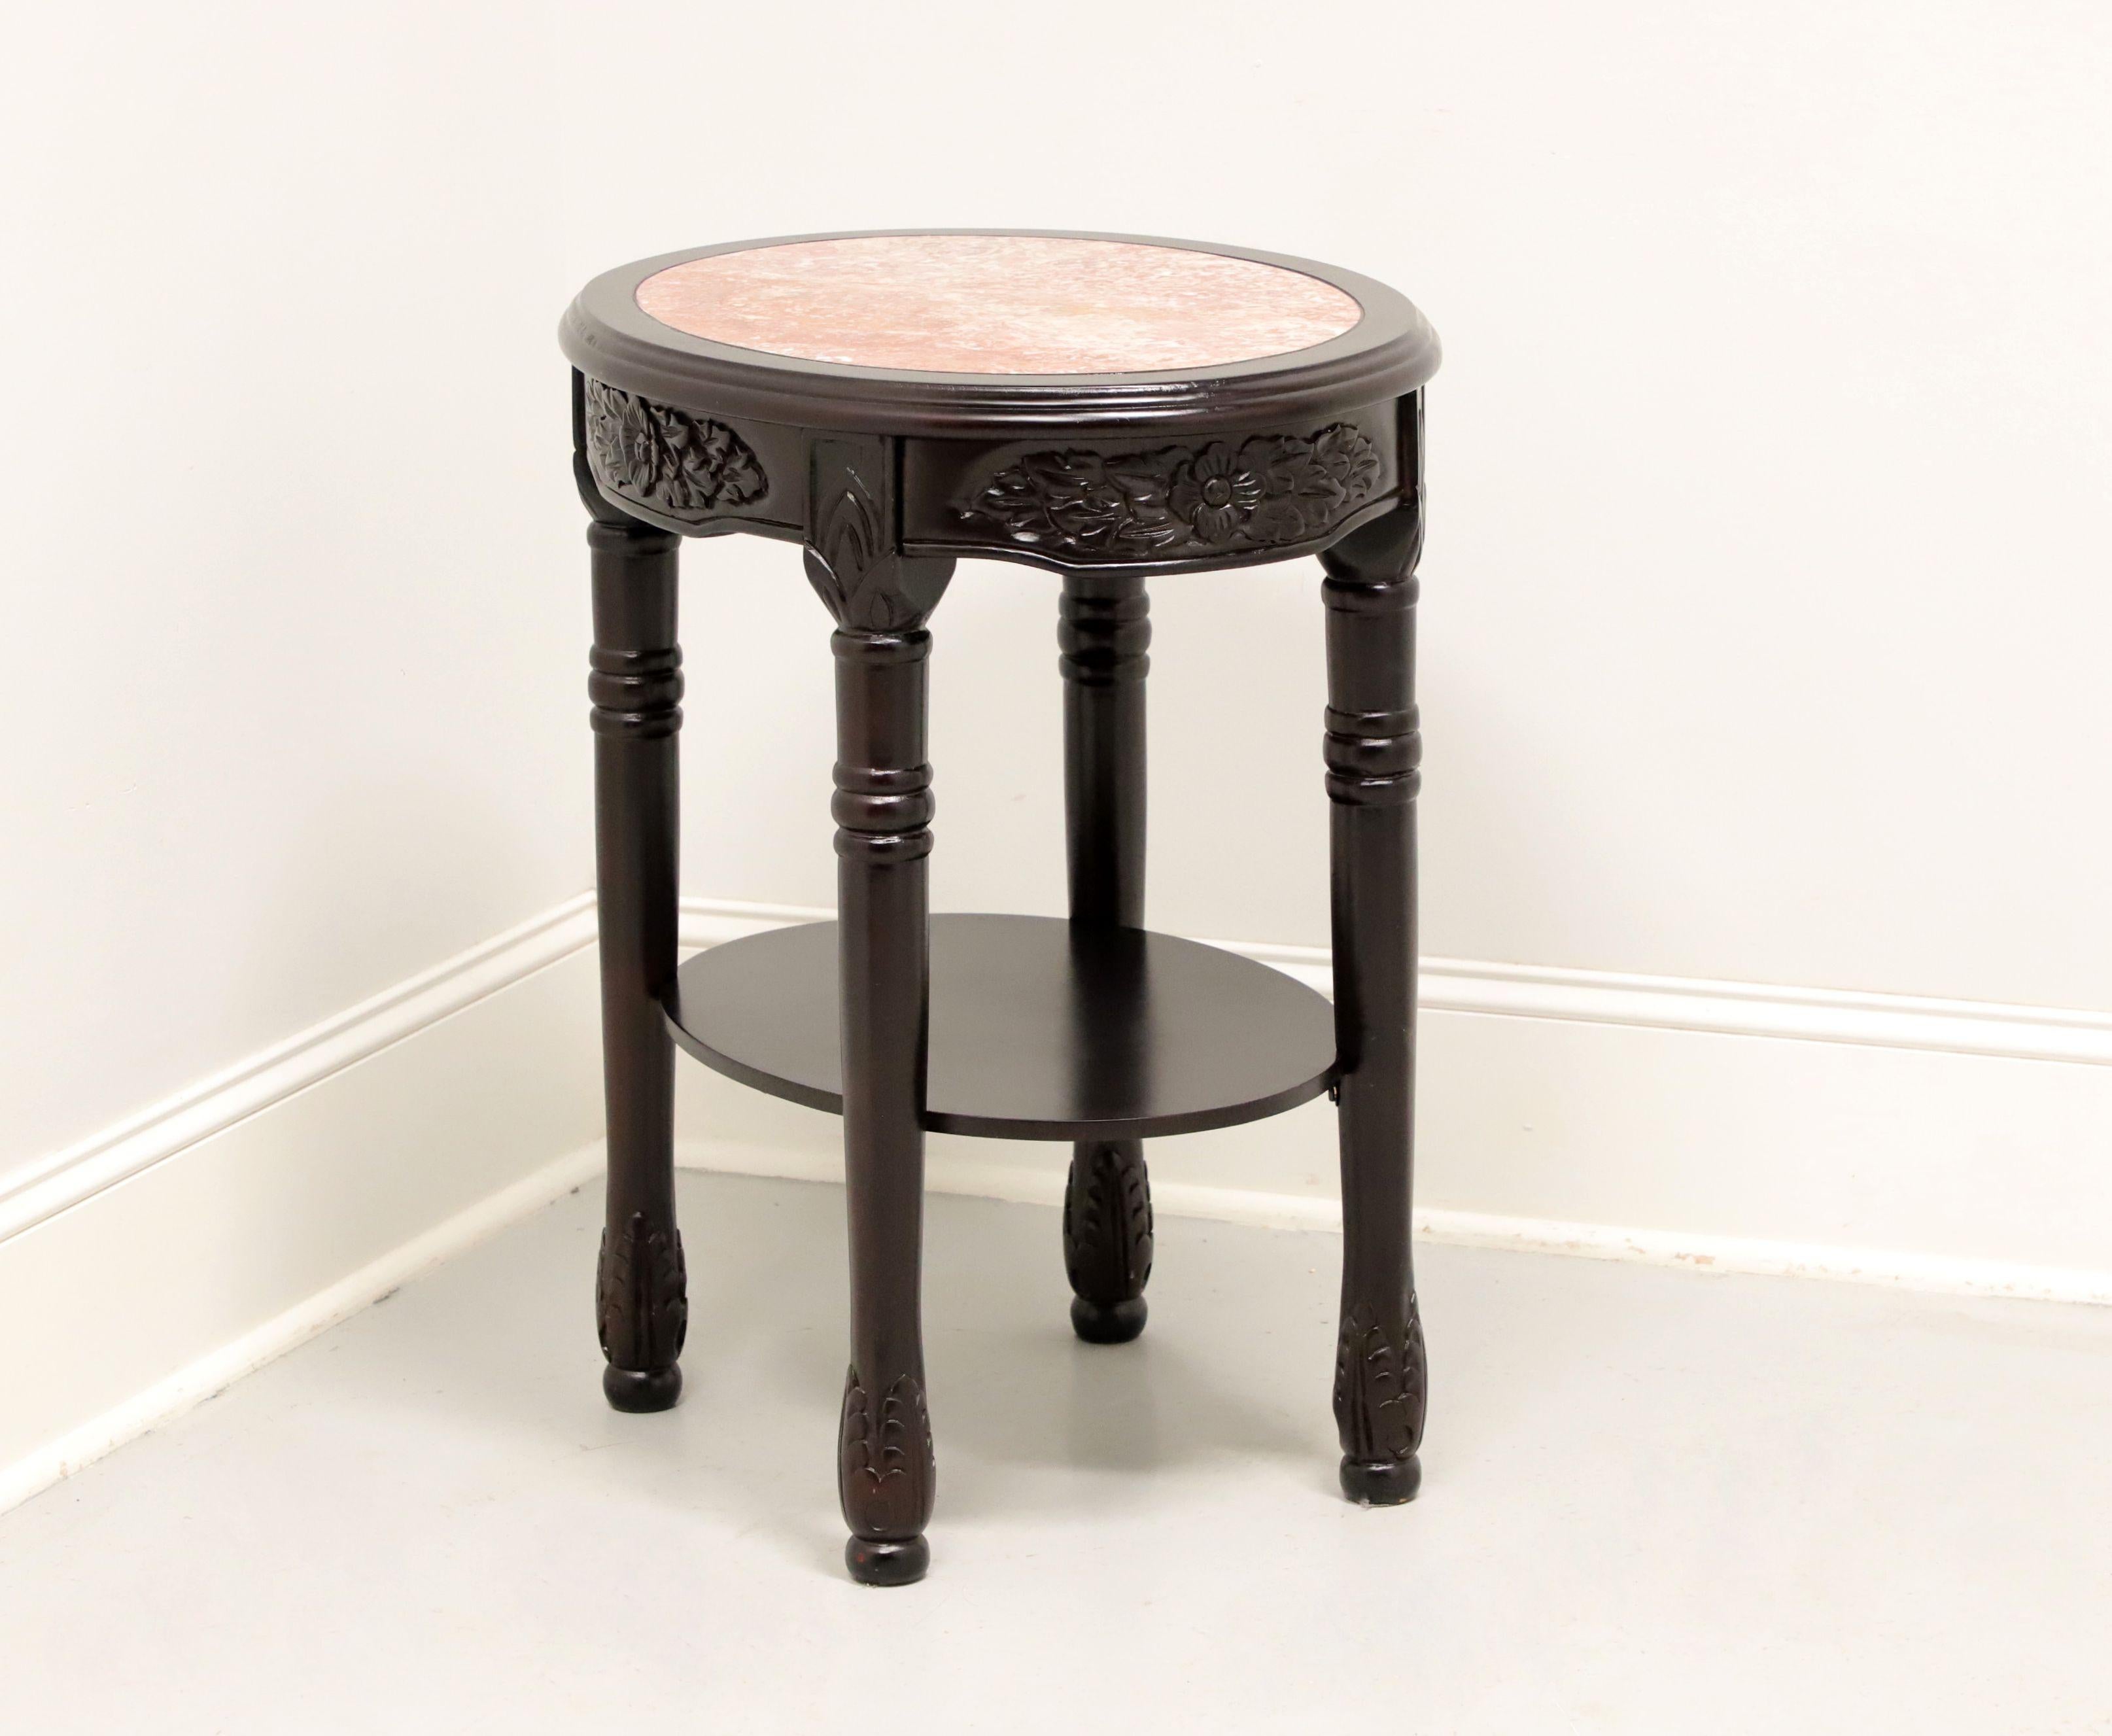 Antique Rosewood Finish Victorian Oval Marble Top Occasional Table - B For Sale 4